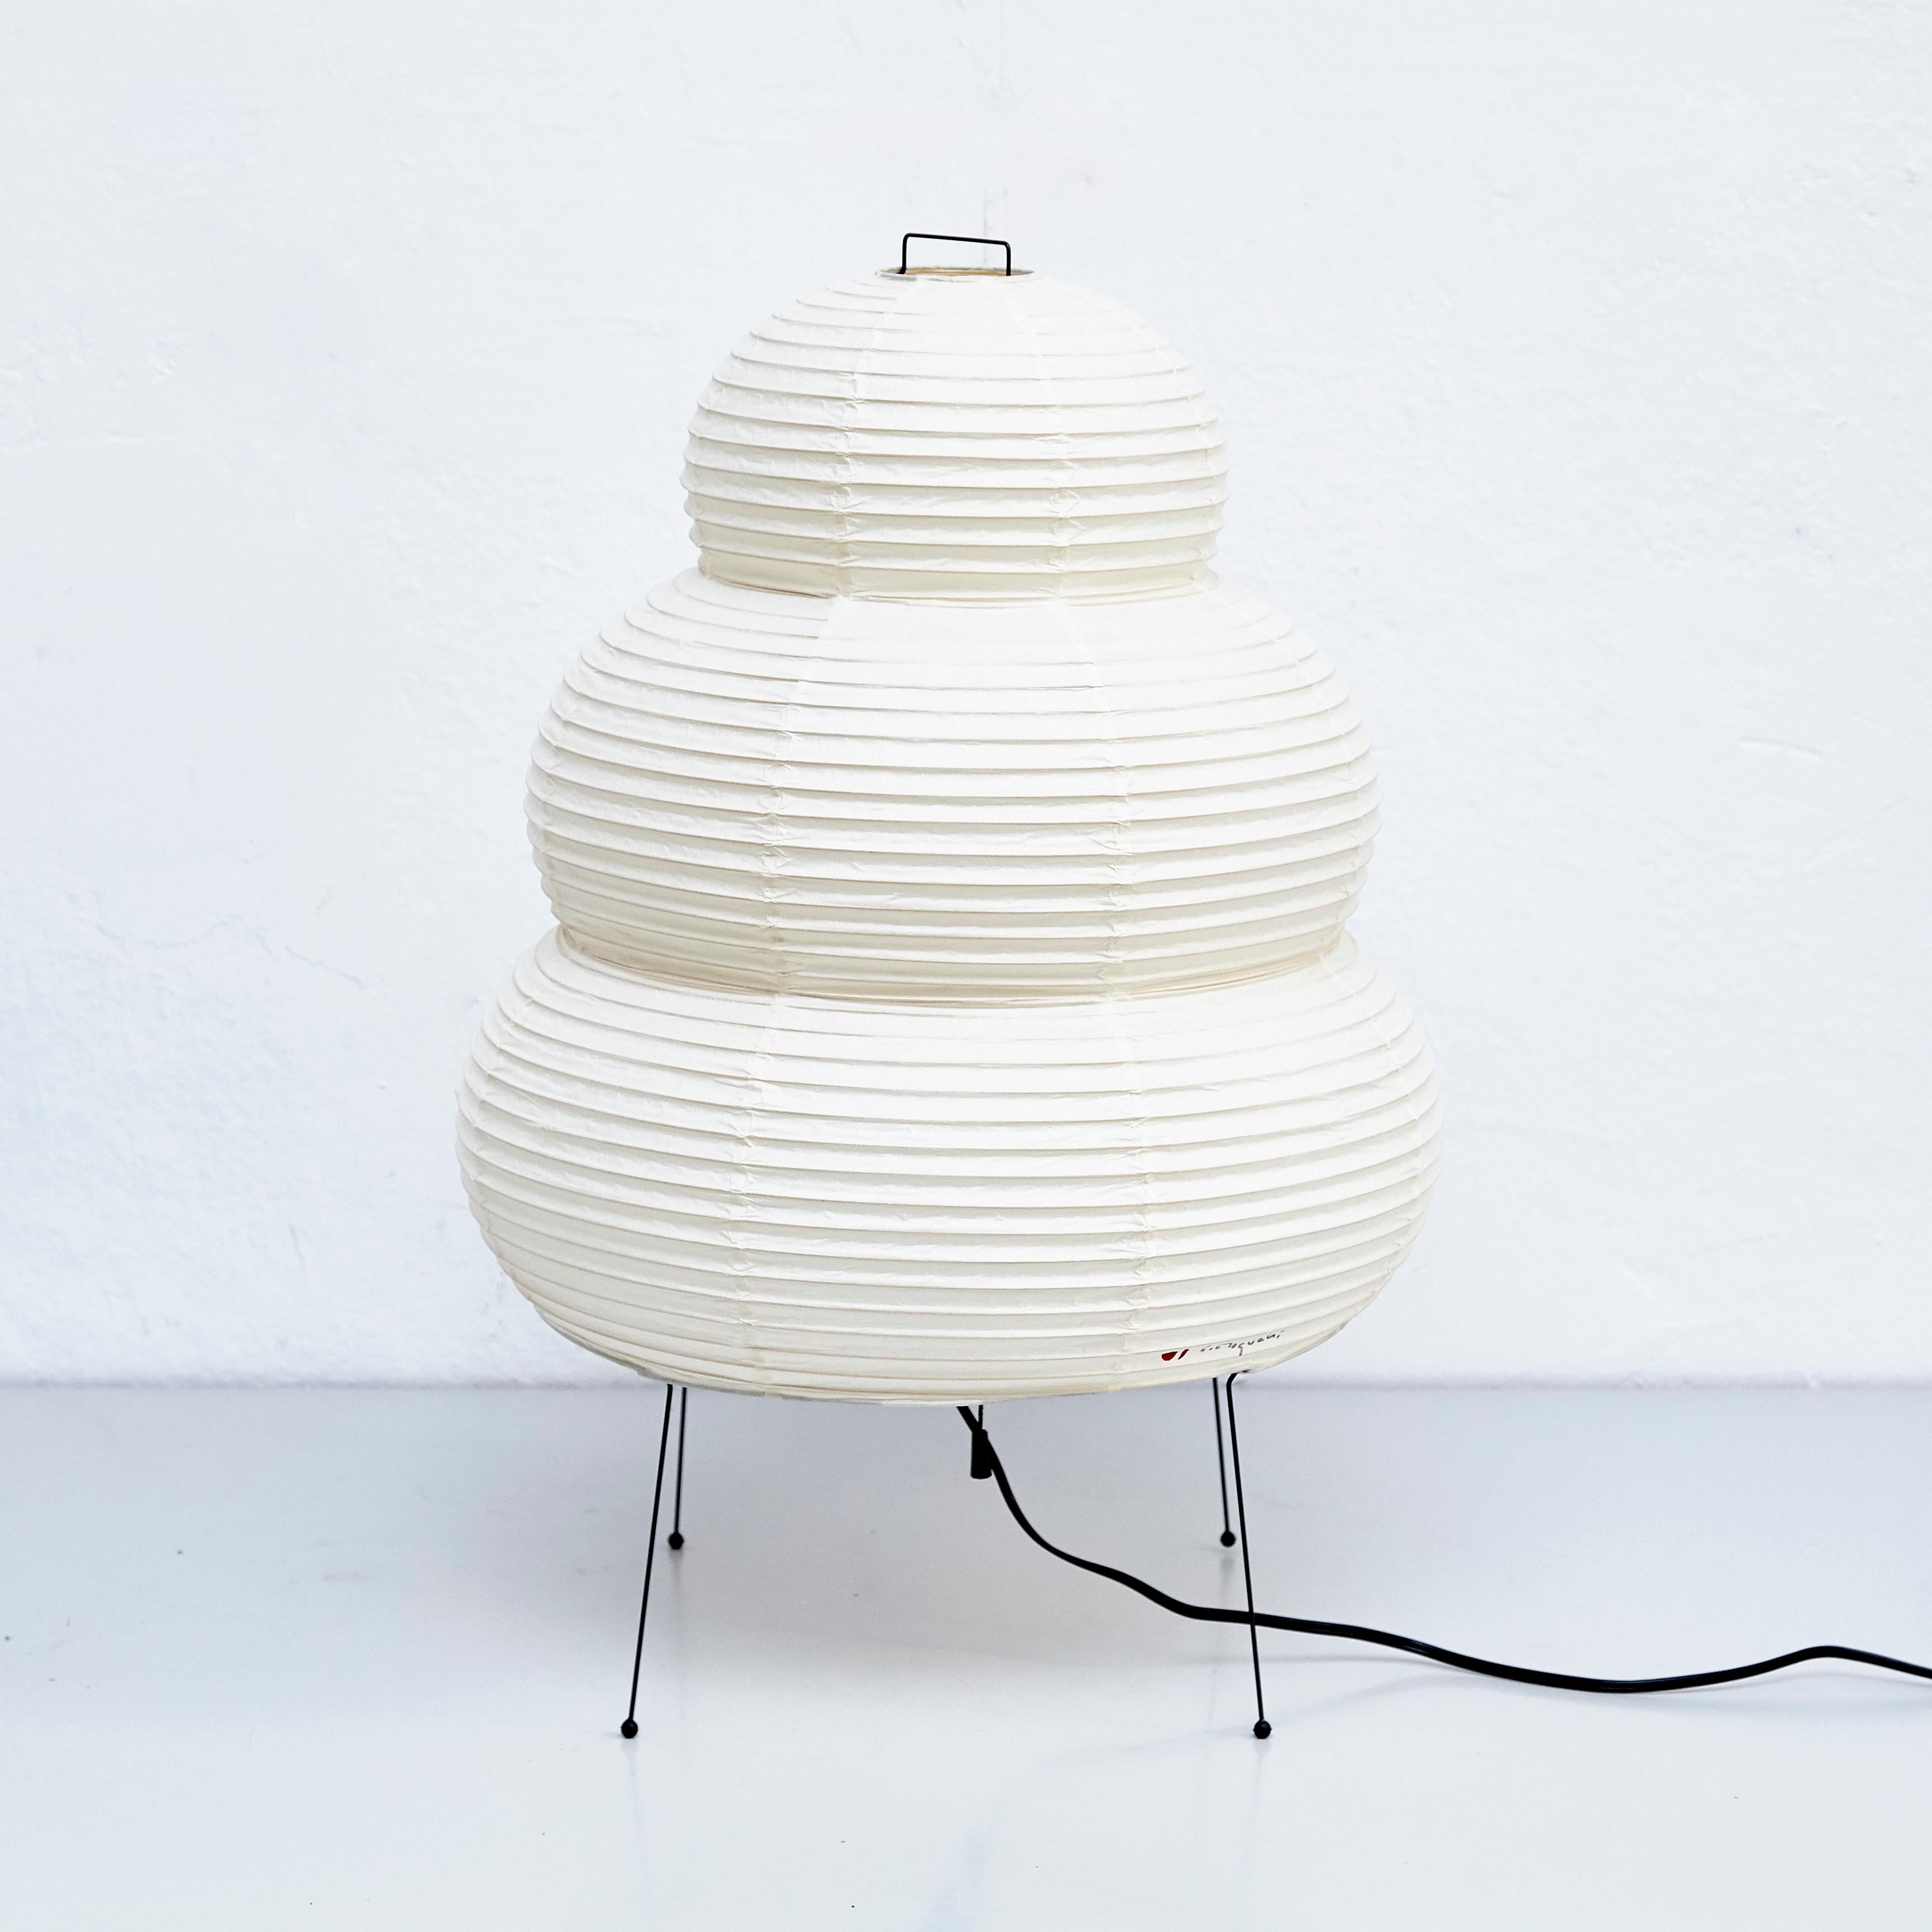 Ceiling lamp, designed by Isamu Noguchi.
Manufactured by Ozeki & Company Ltd. (Japan.)
Bamboo ribbing structure covered by washi paper manufactured according to the traditional procedures.

In good vintage condition.

Edition signed with